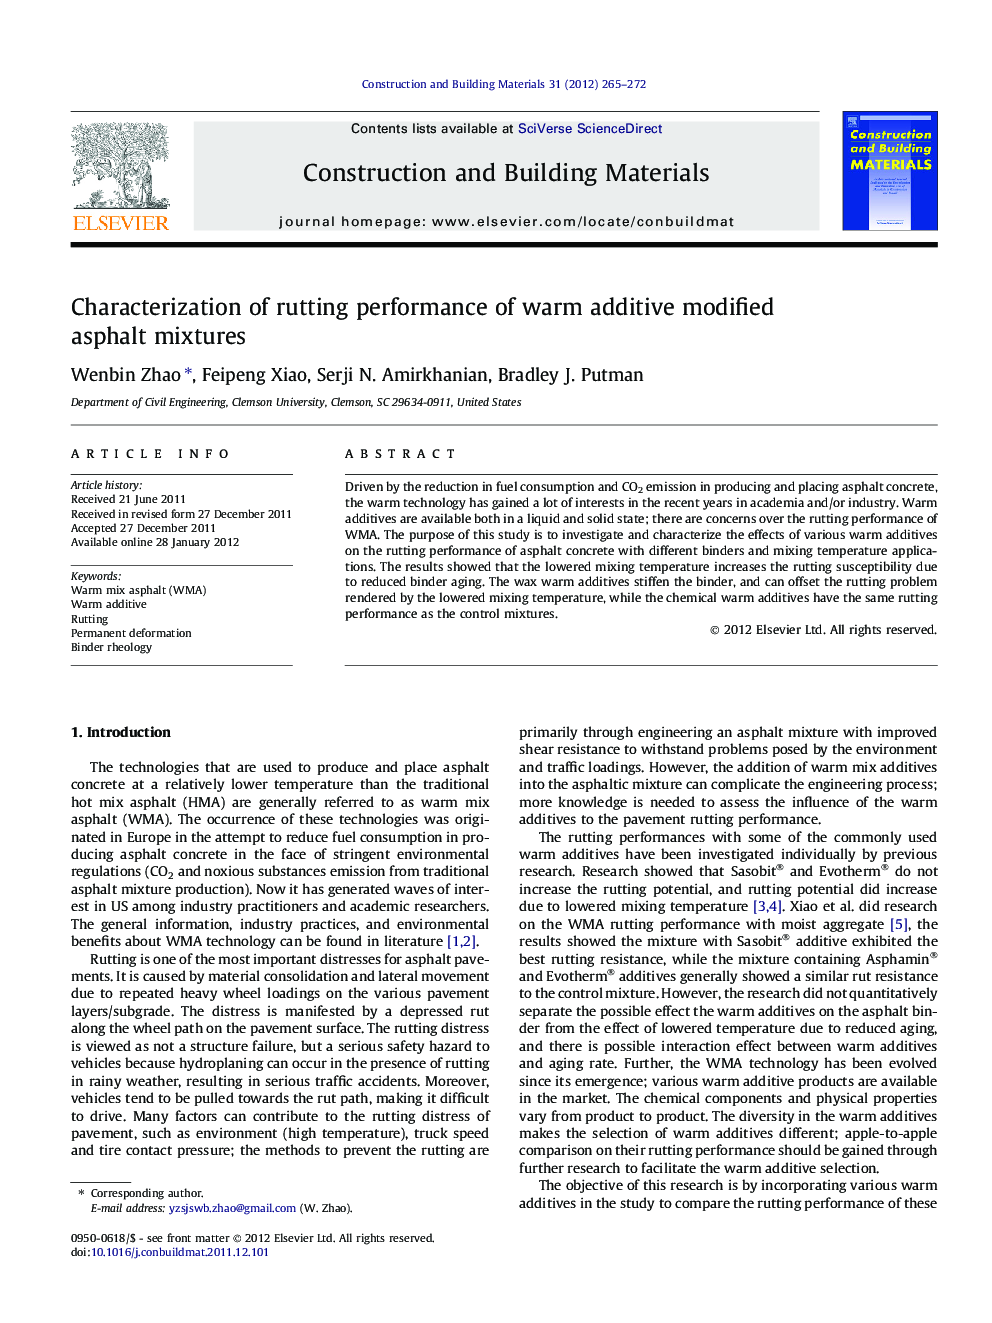 Characterization of rutting performance of warm additive modified asphalt mixtures